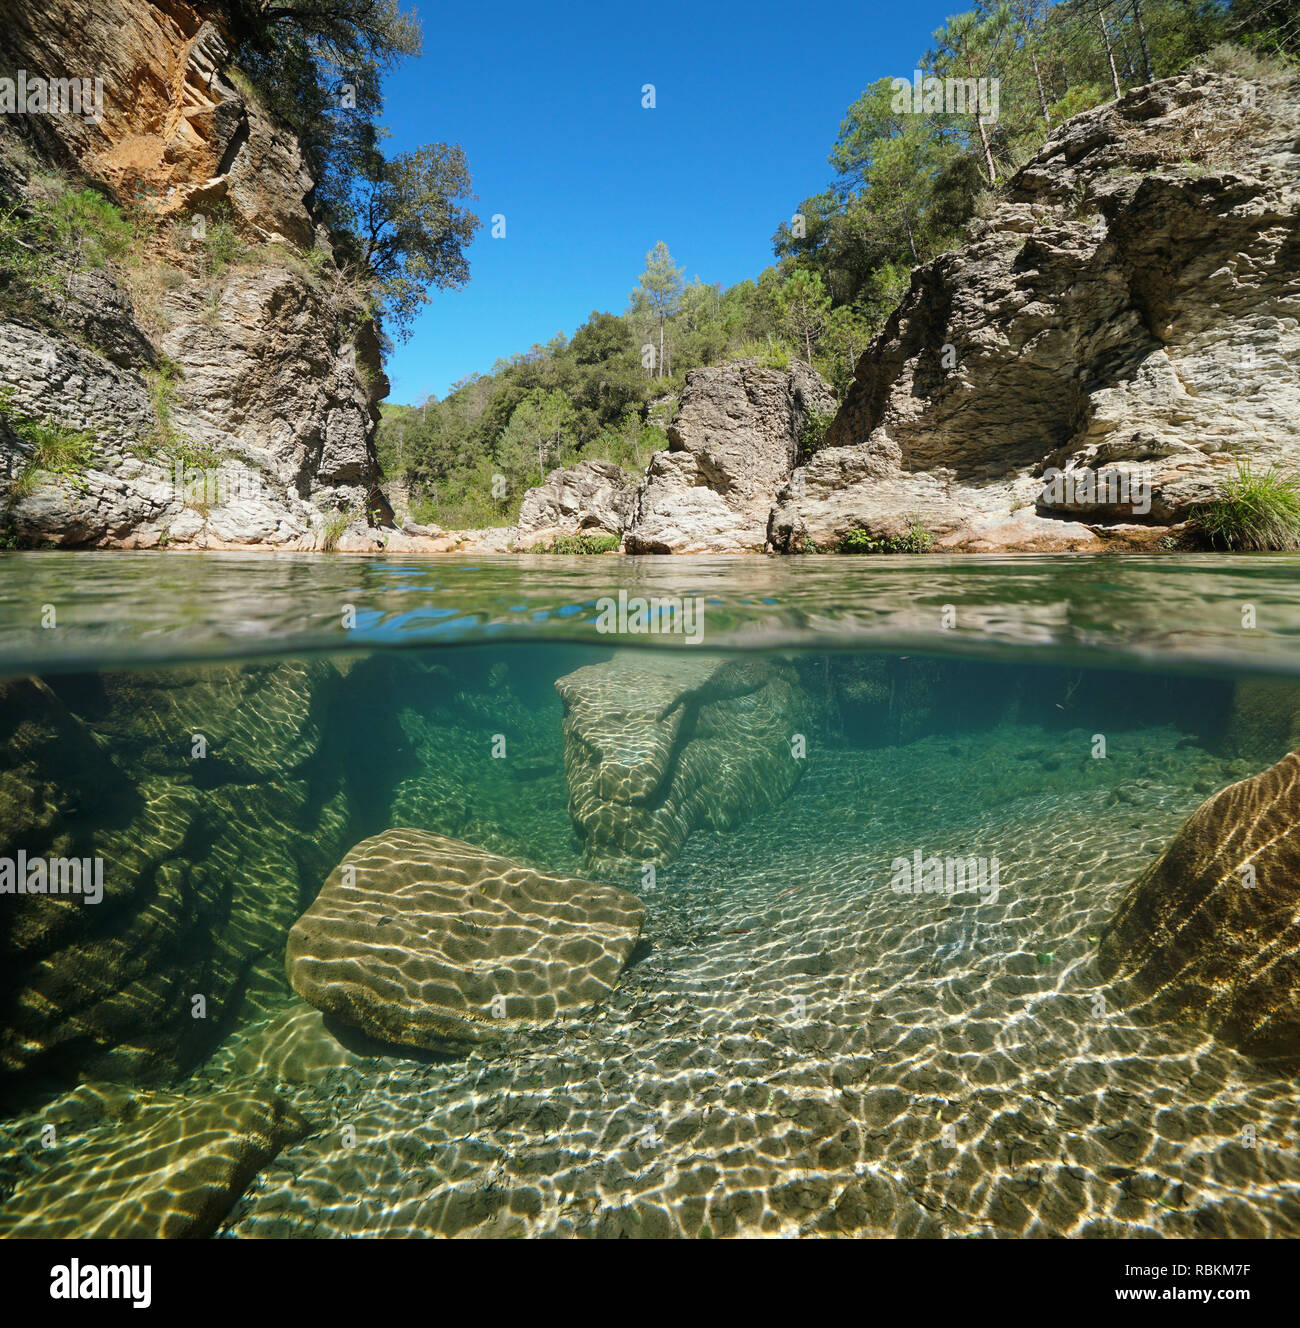 Wild river with rocks over and underwater, split view half above and below water surface, La Muga, Catalonia, Spain Stock Photo